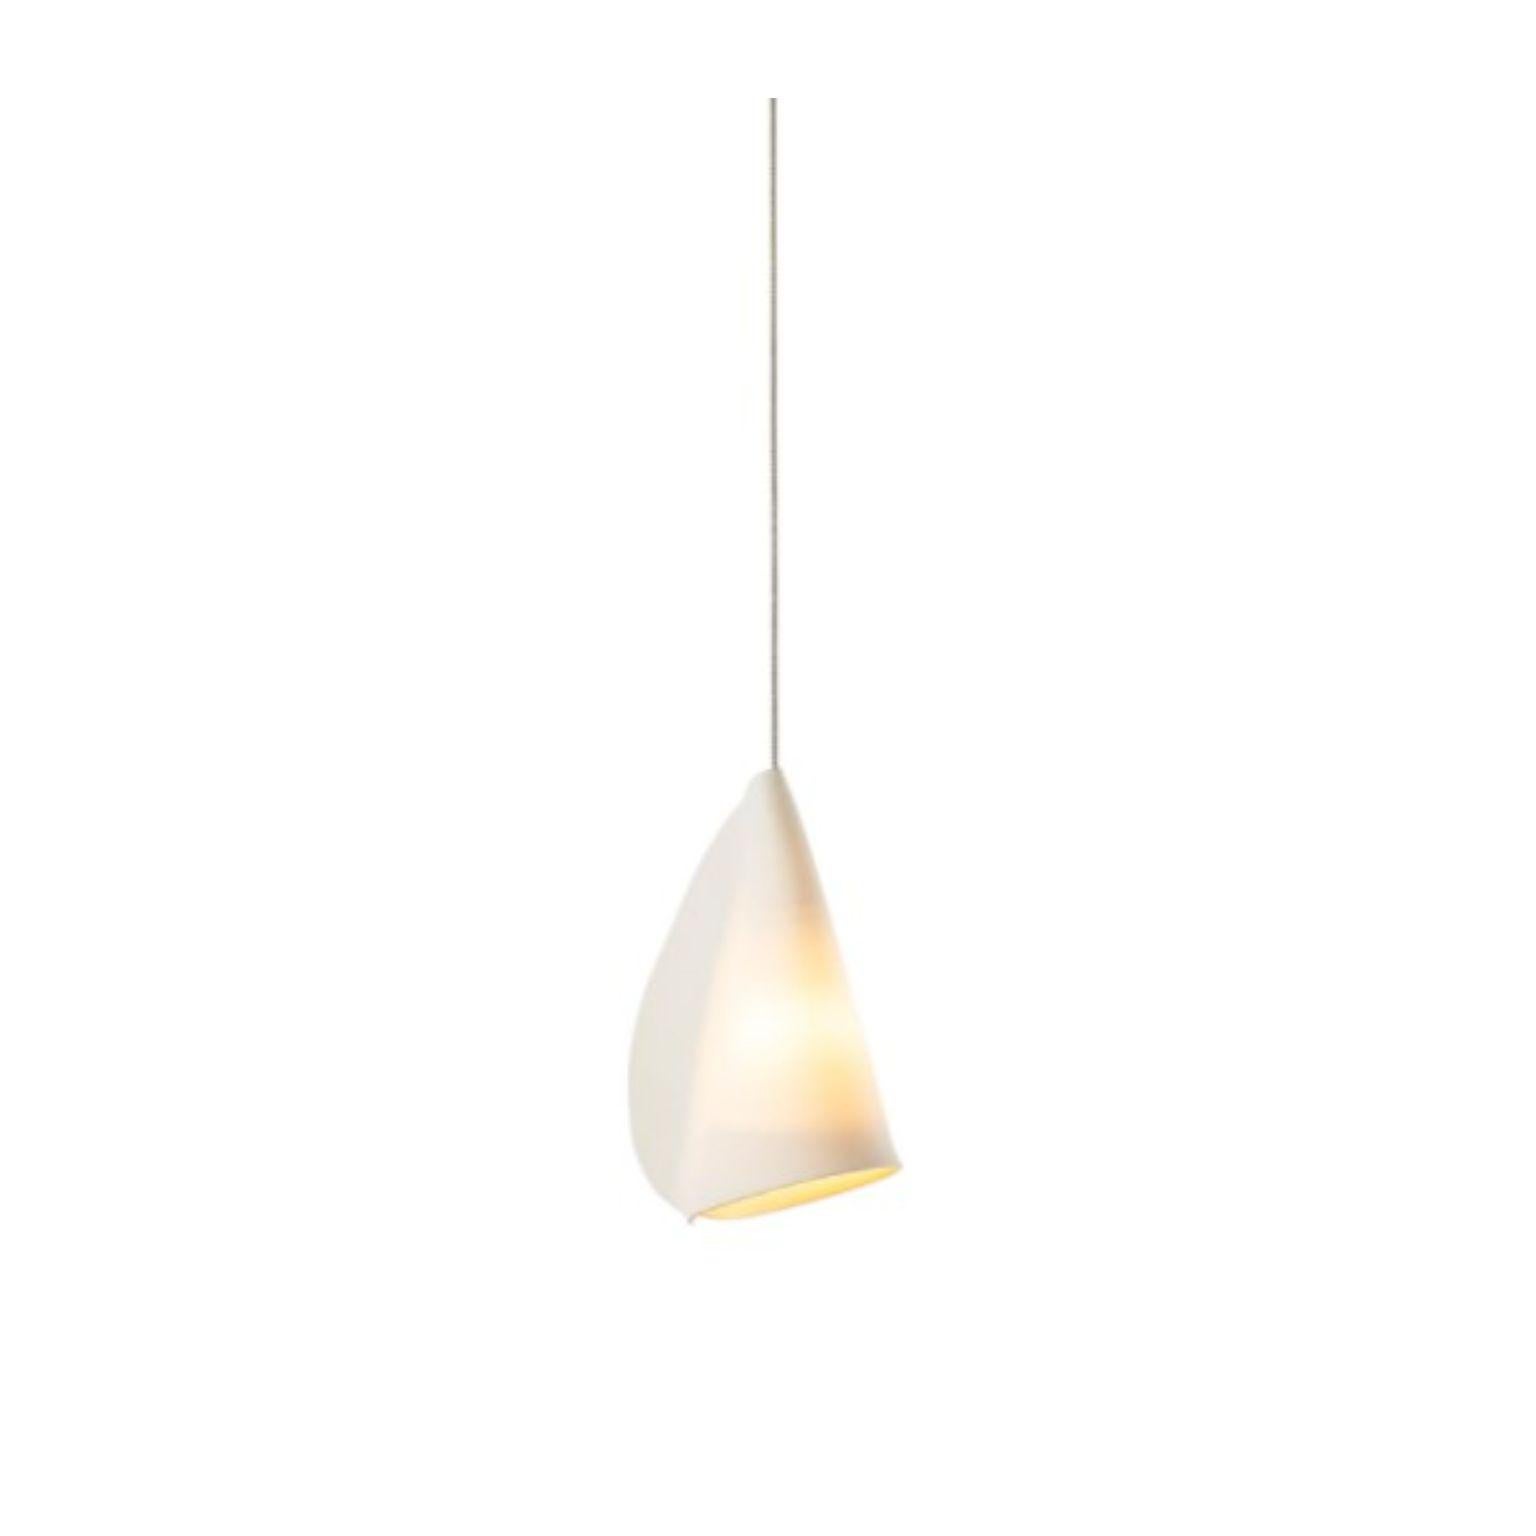 21.1 pendant by Bocci
Dimensions: D11.6 x H300 cm
Materials: brushed nickel, round canopy.
Weight: 0.5 kg
Also Available in different dimensions.

All our lamps can be wired according to each country. If sold to the USA it will be wired for